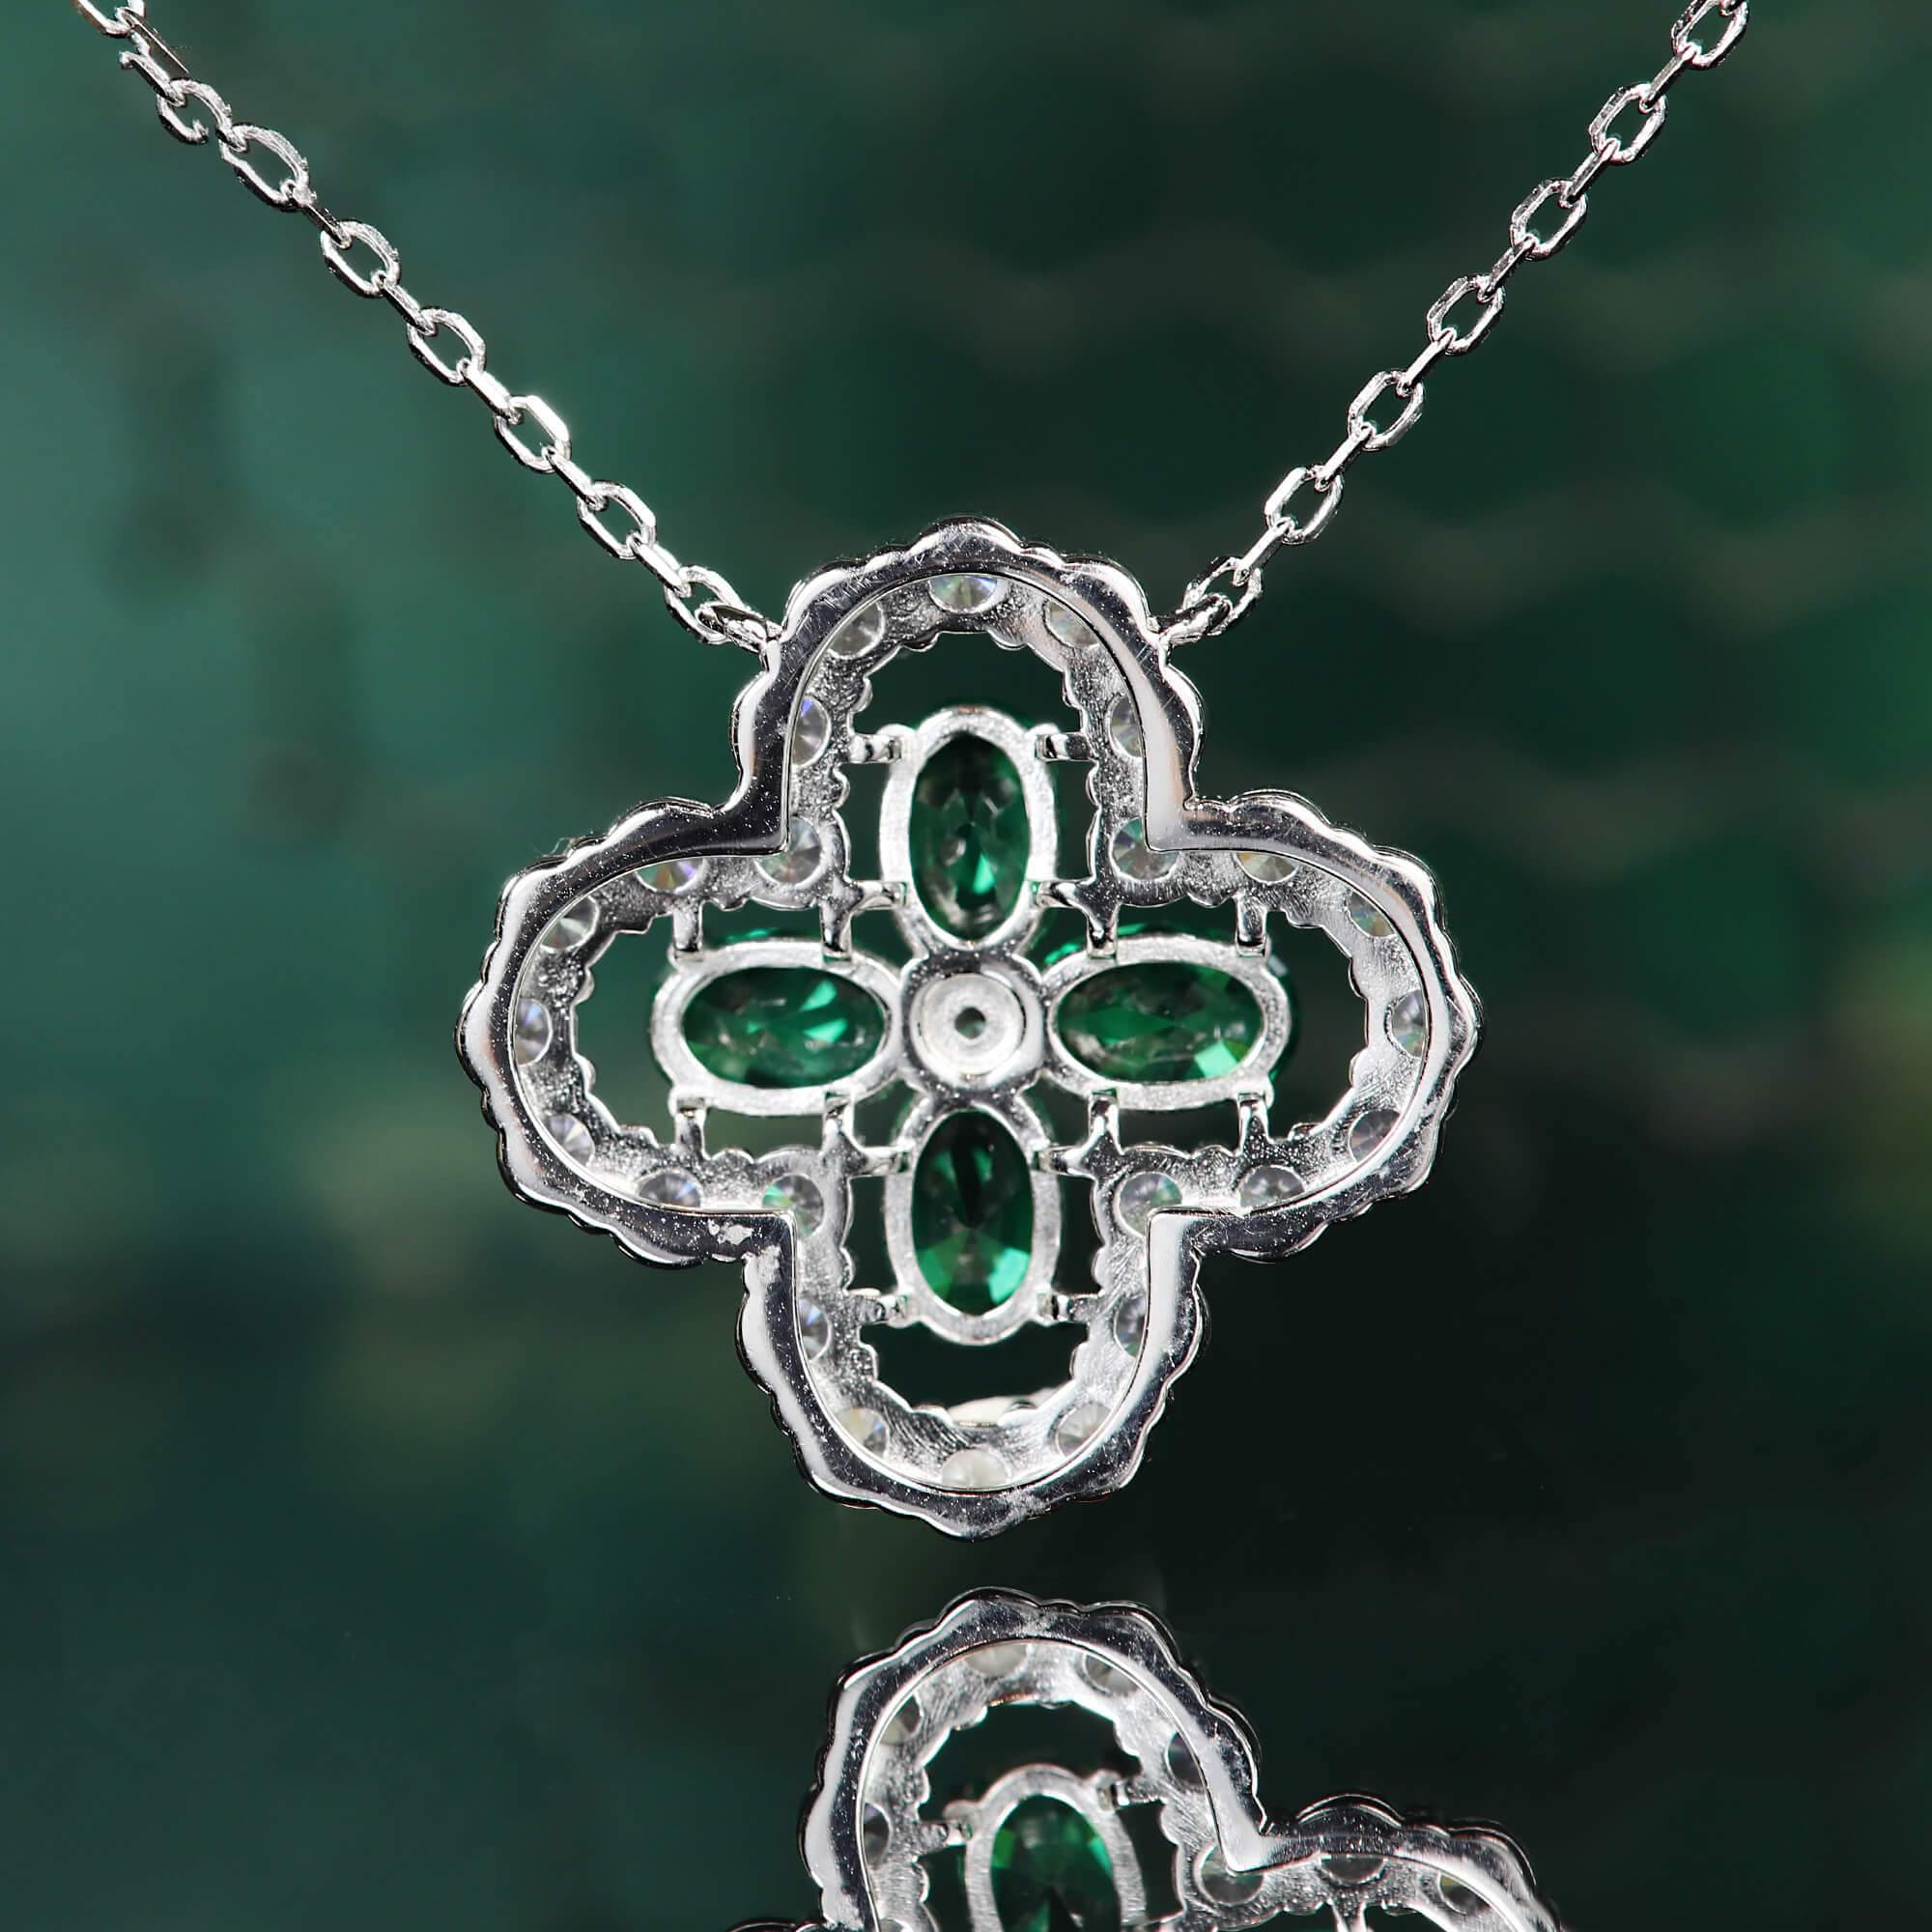 Luxury Clover Green Crystal Pendant Four Leaf Flower Necklace - Rose Gold  at Rs 210/piece | New Delhi| ID: 2851570109162